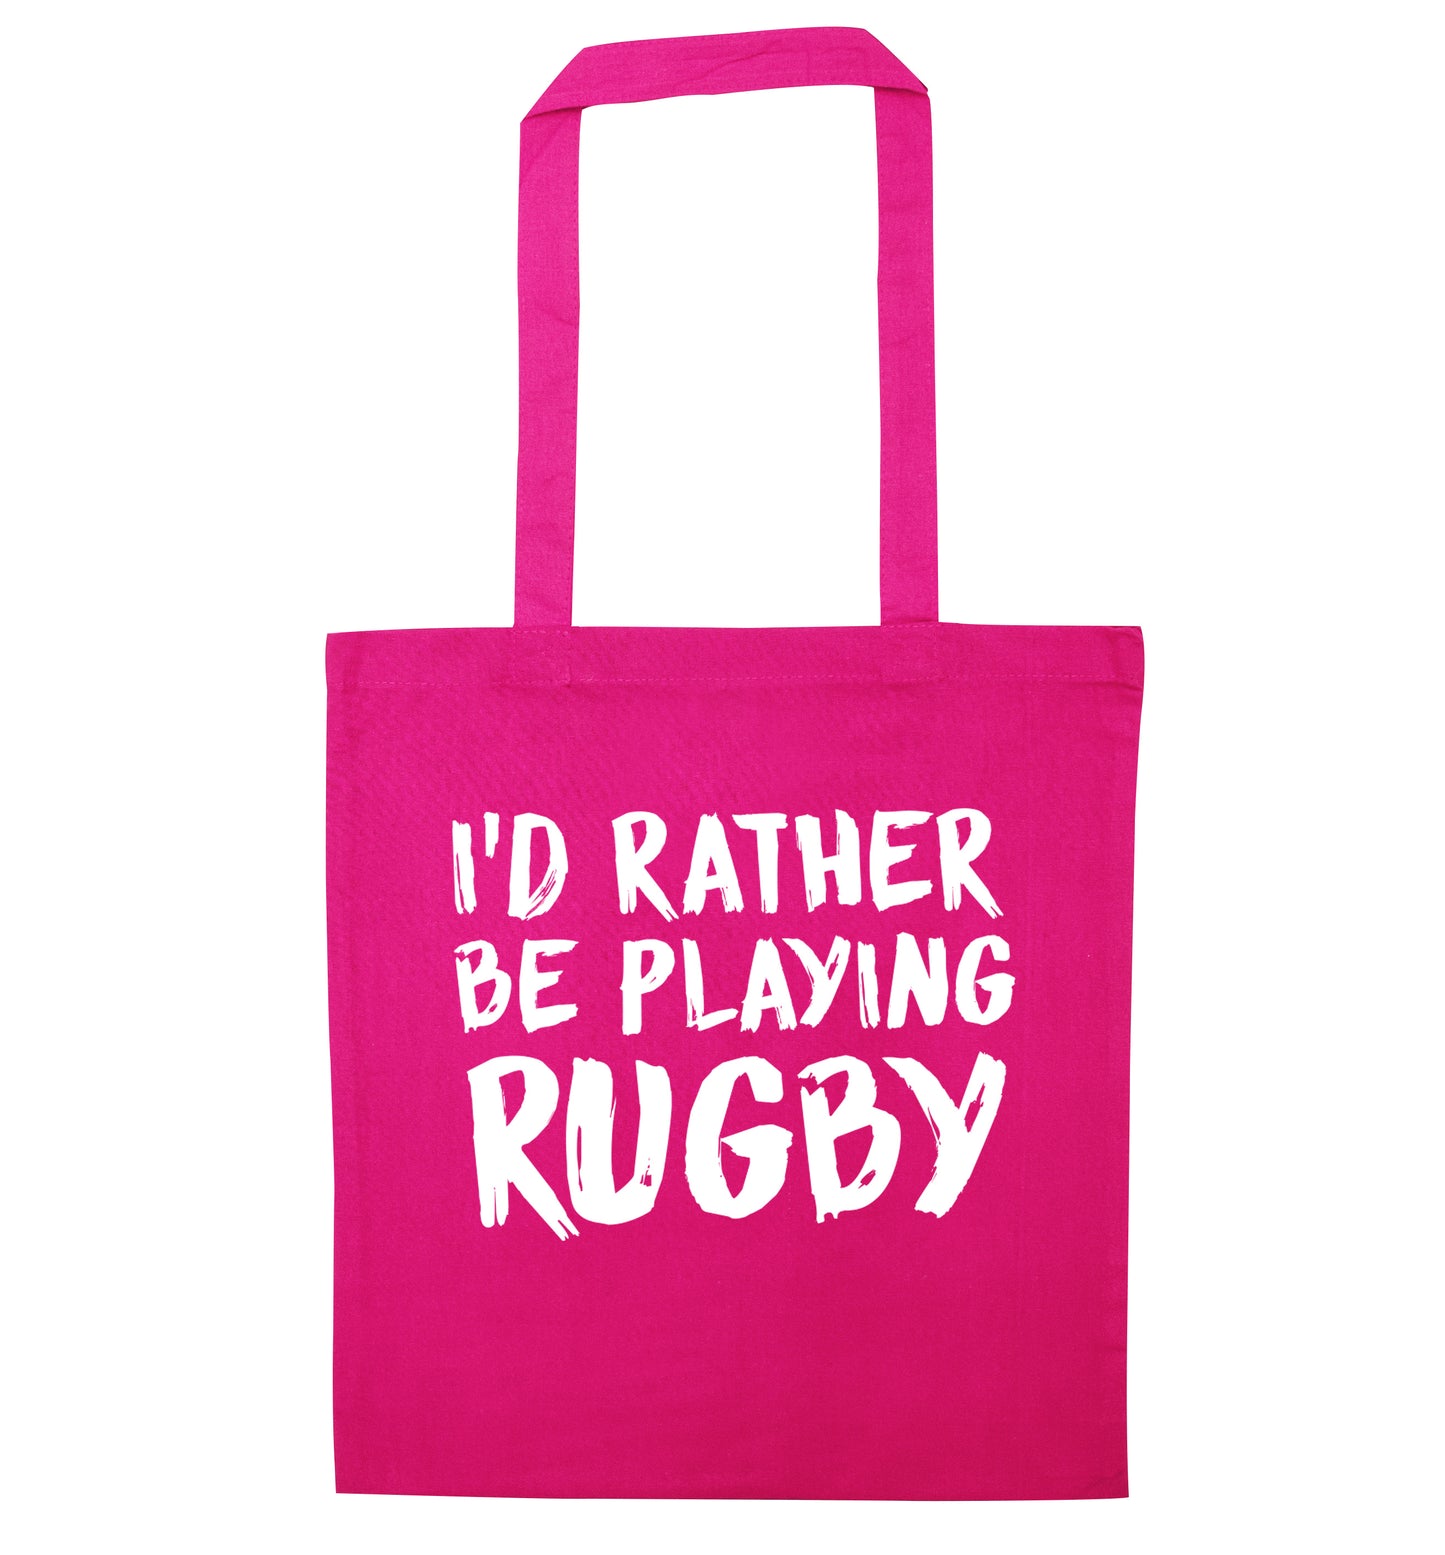 I'd rather be playing rugby pink tote bag